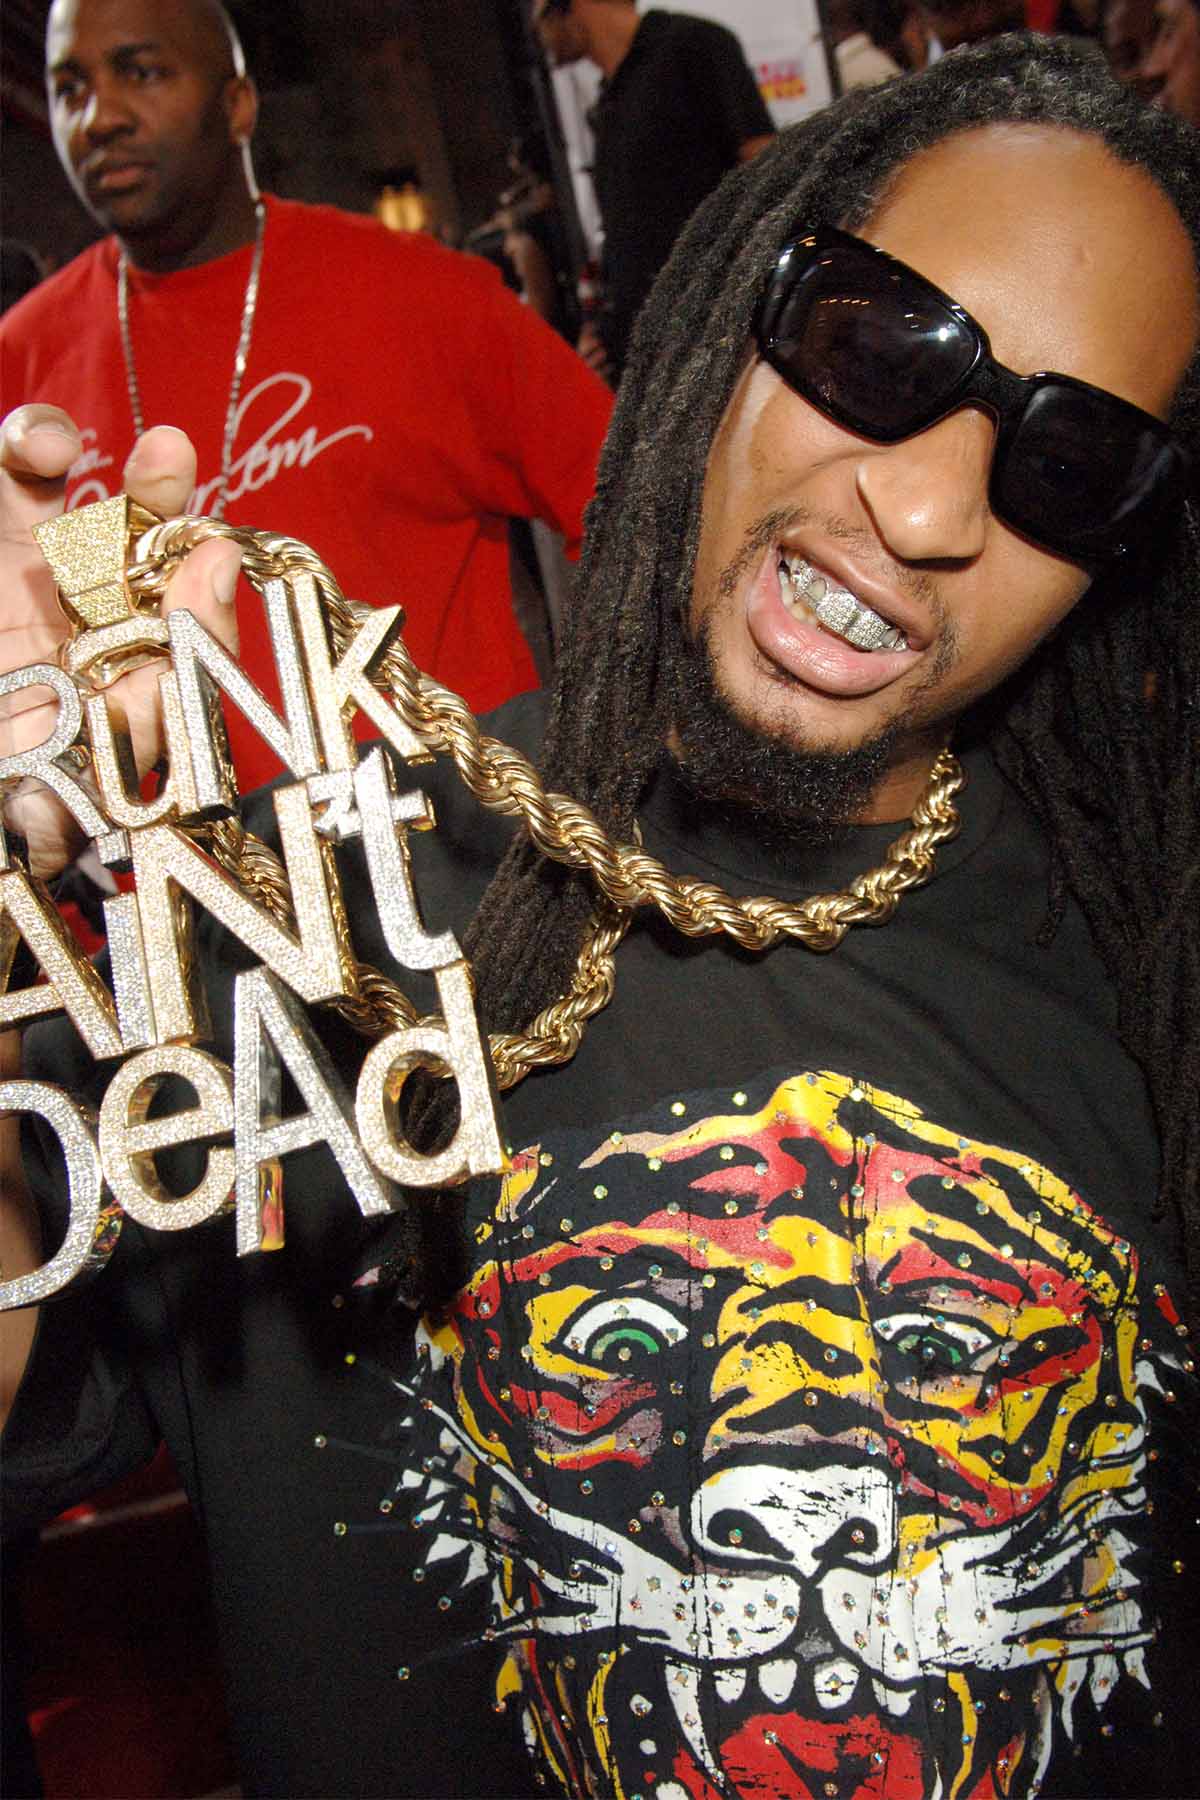 Lil Jon during the 2006 MTV Video Music Awards flaunting his iconic 'Crunk Ain't Dead' chain.